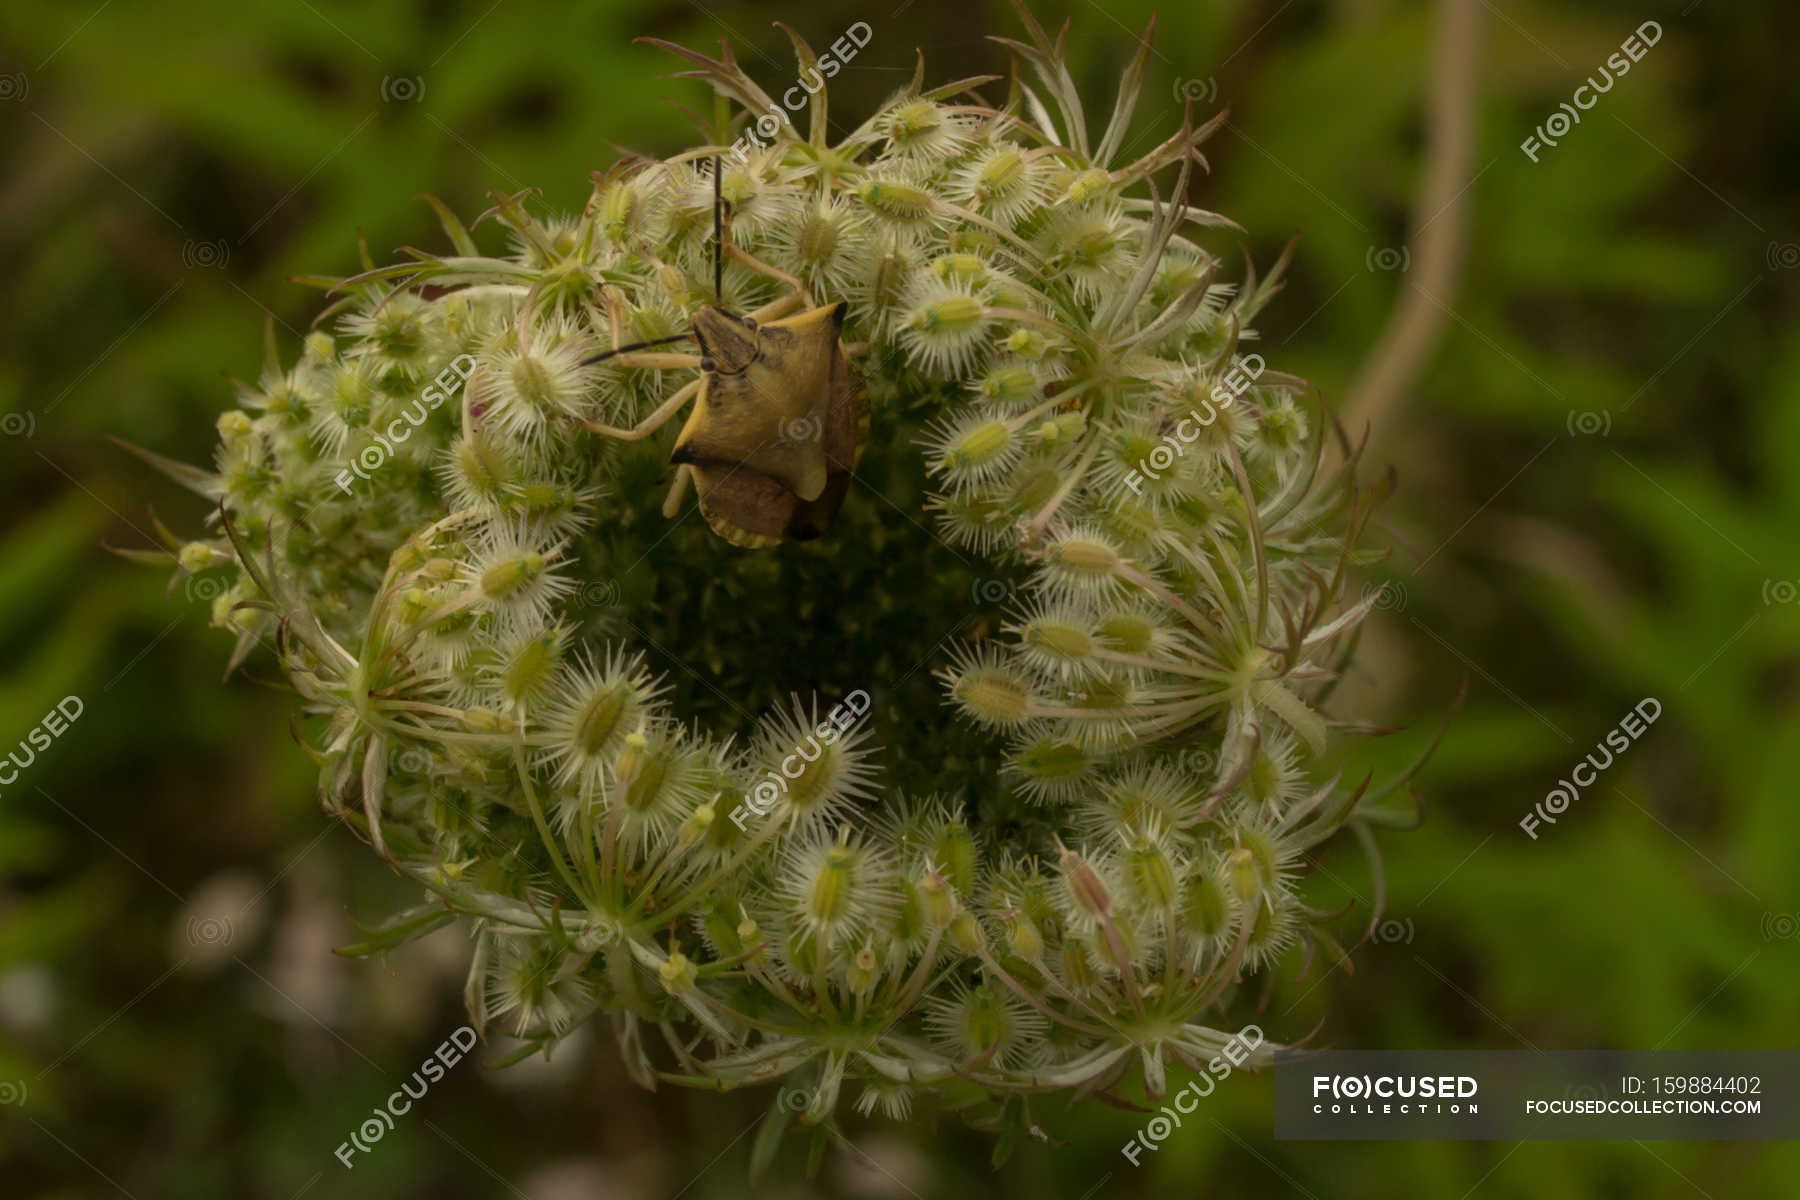 Closeup view of wild plant and crawling bug — Stock Photo | #159884402